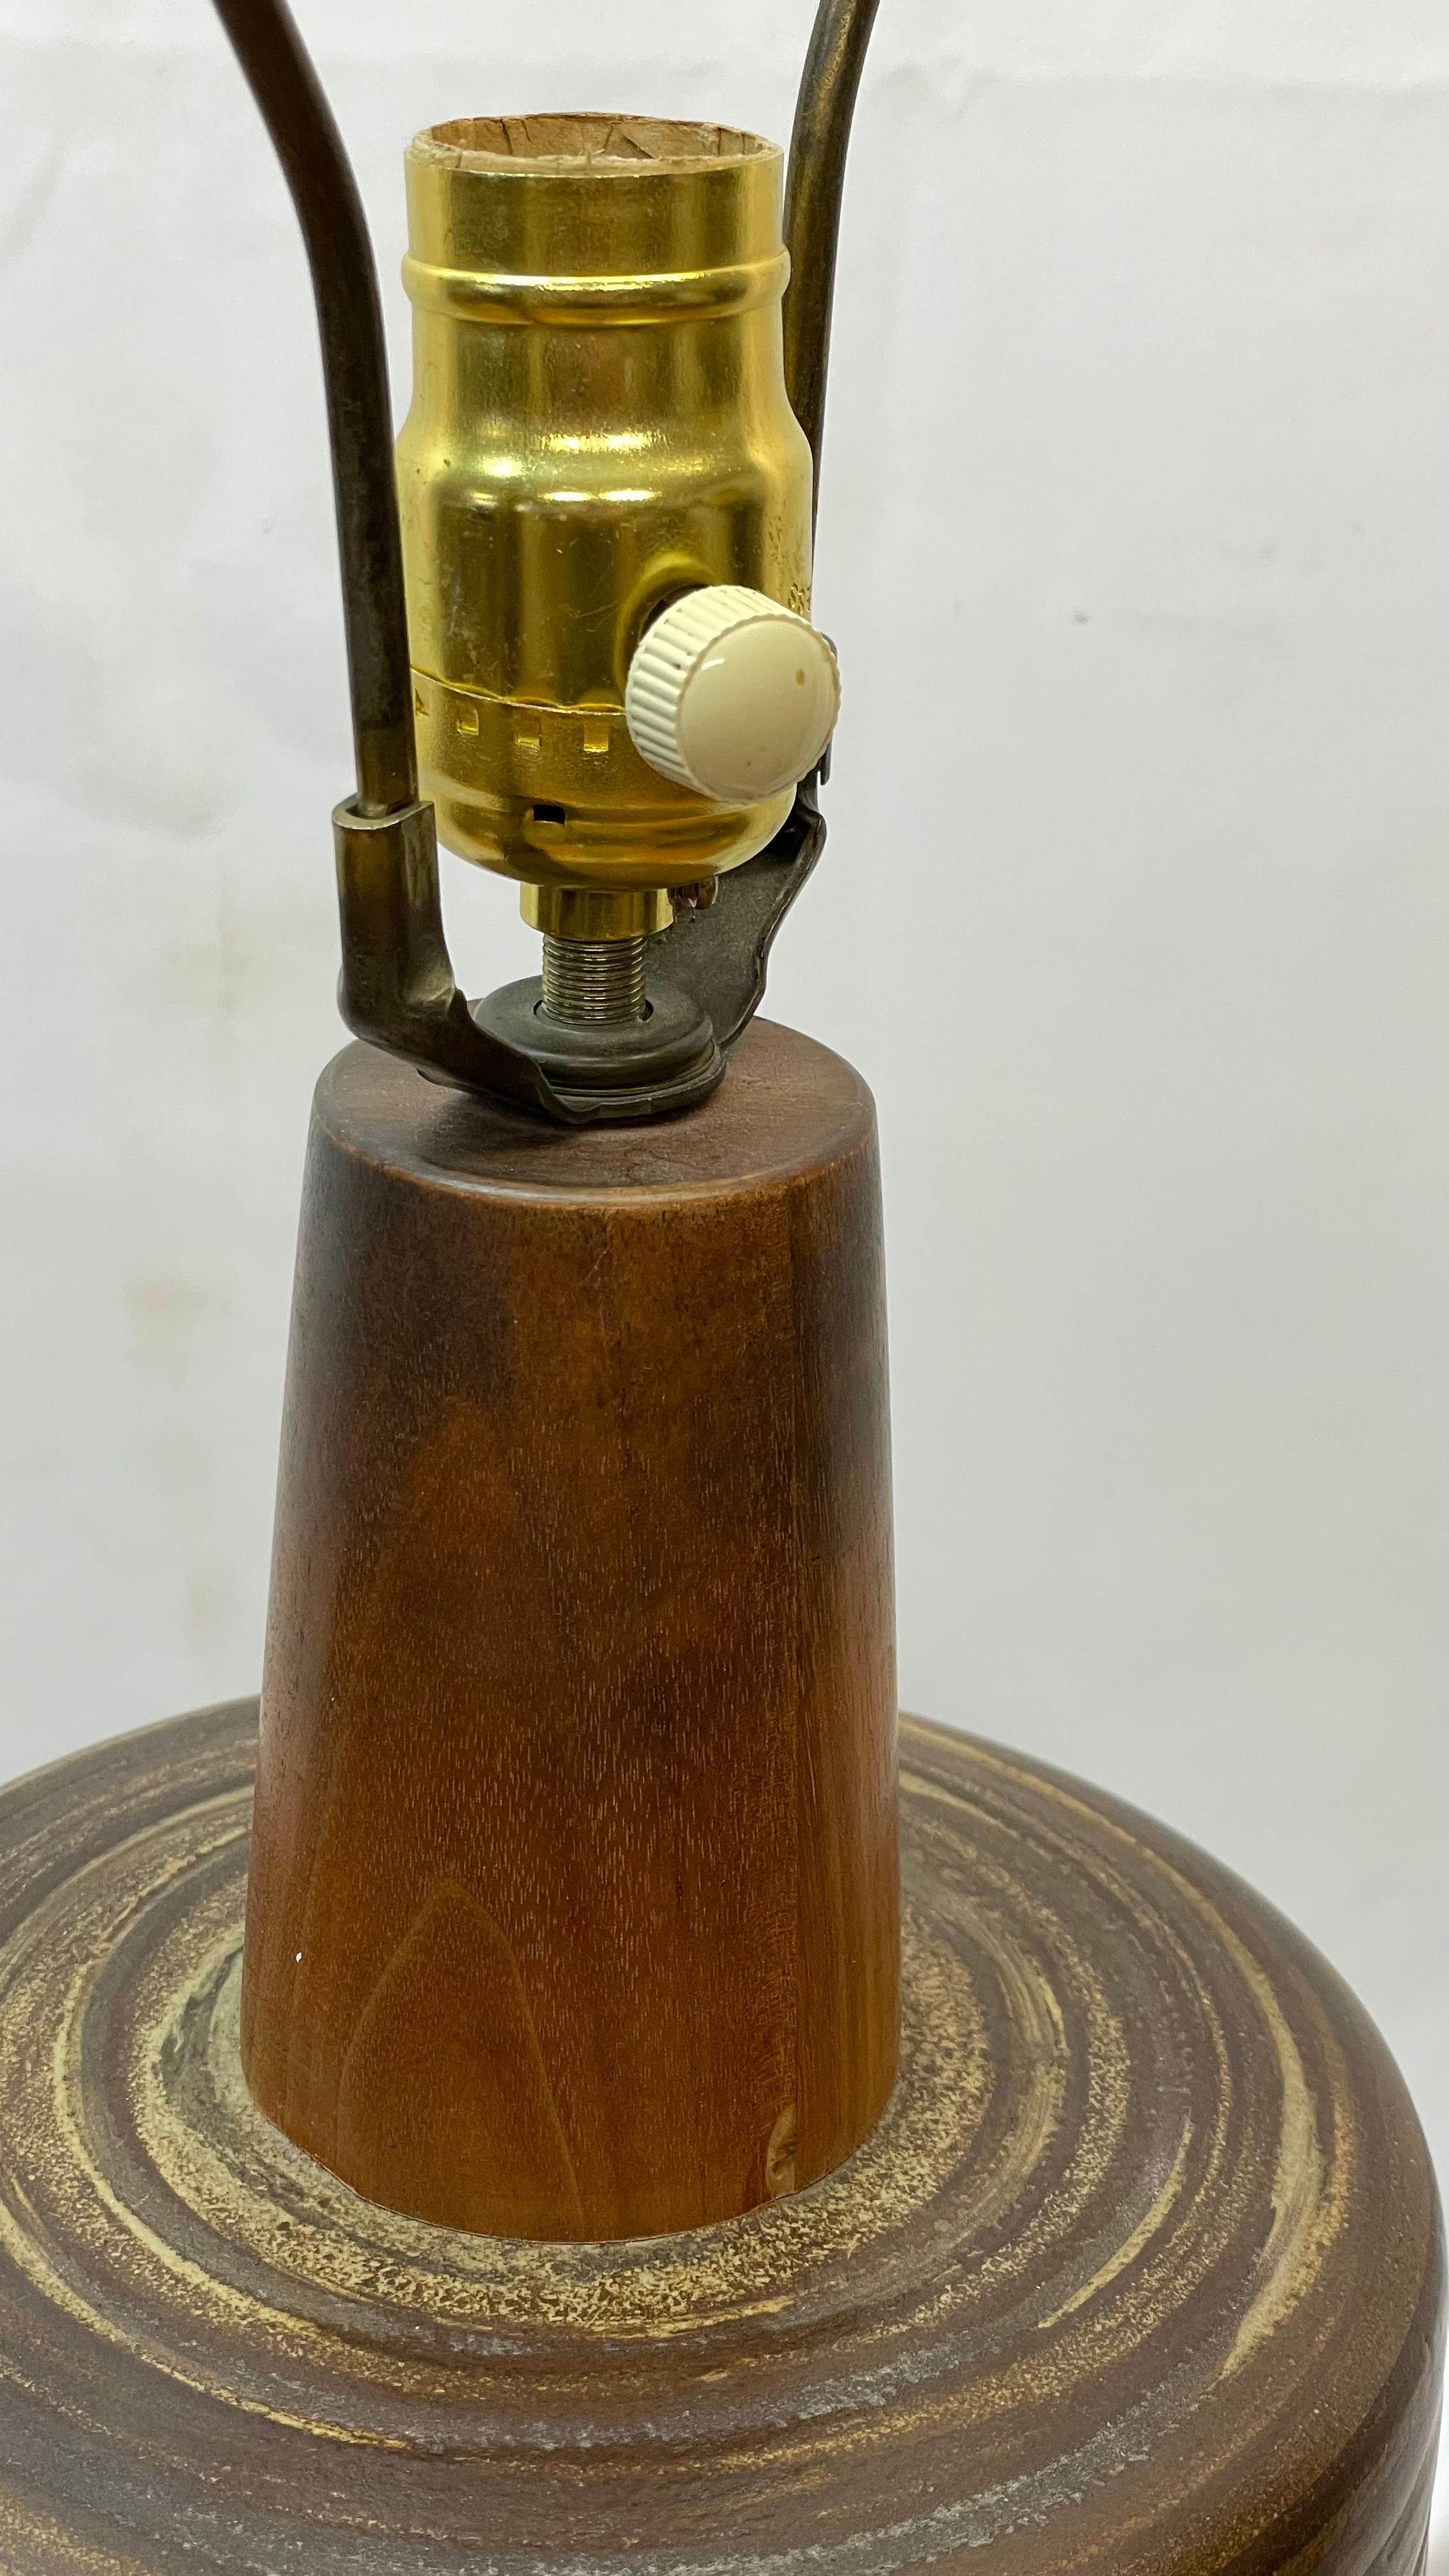 Martz Ceramic Table Lamp w/Brown Swirl Design and Wood Finial In Good Condition For Sale In San Francisco, CA